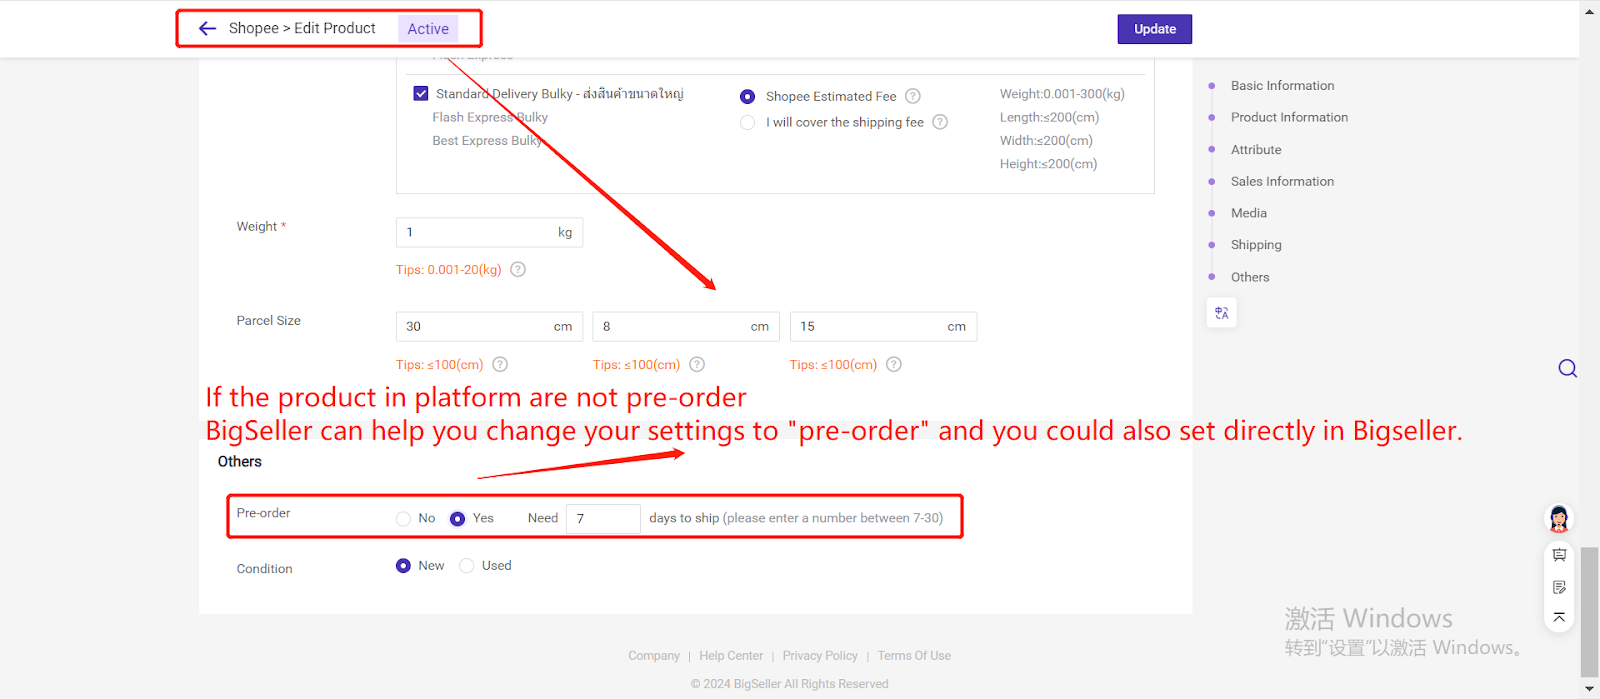 How to Set Up Pre-Order Products on Shopee/Lazada/TikTok and What are the Requirements? How to Fulfill Pre-Order?